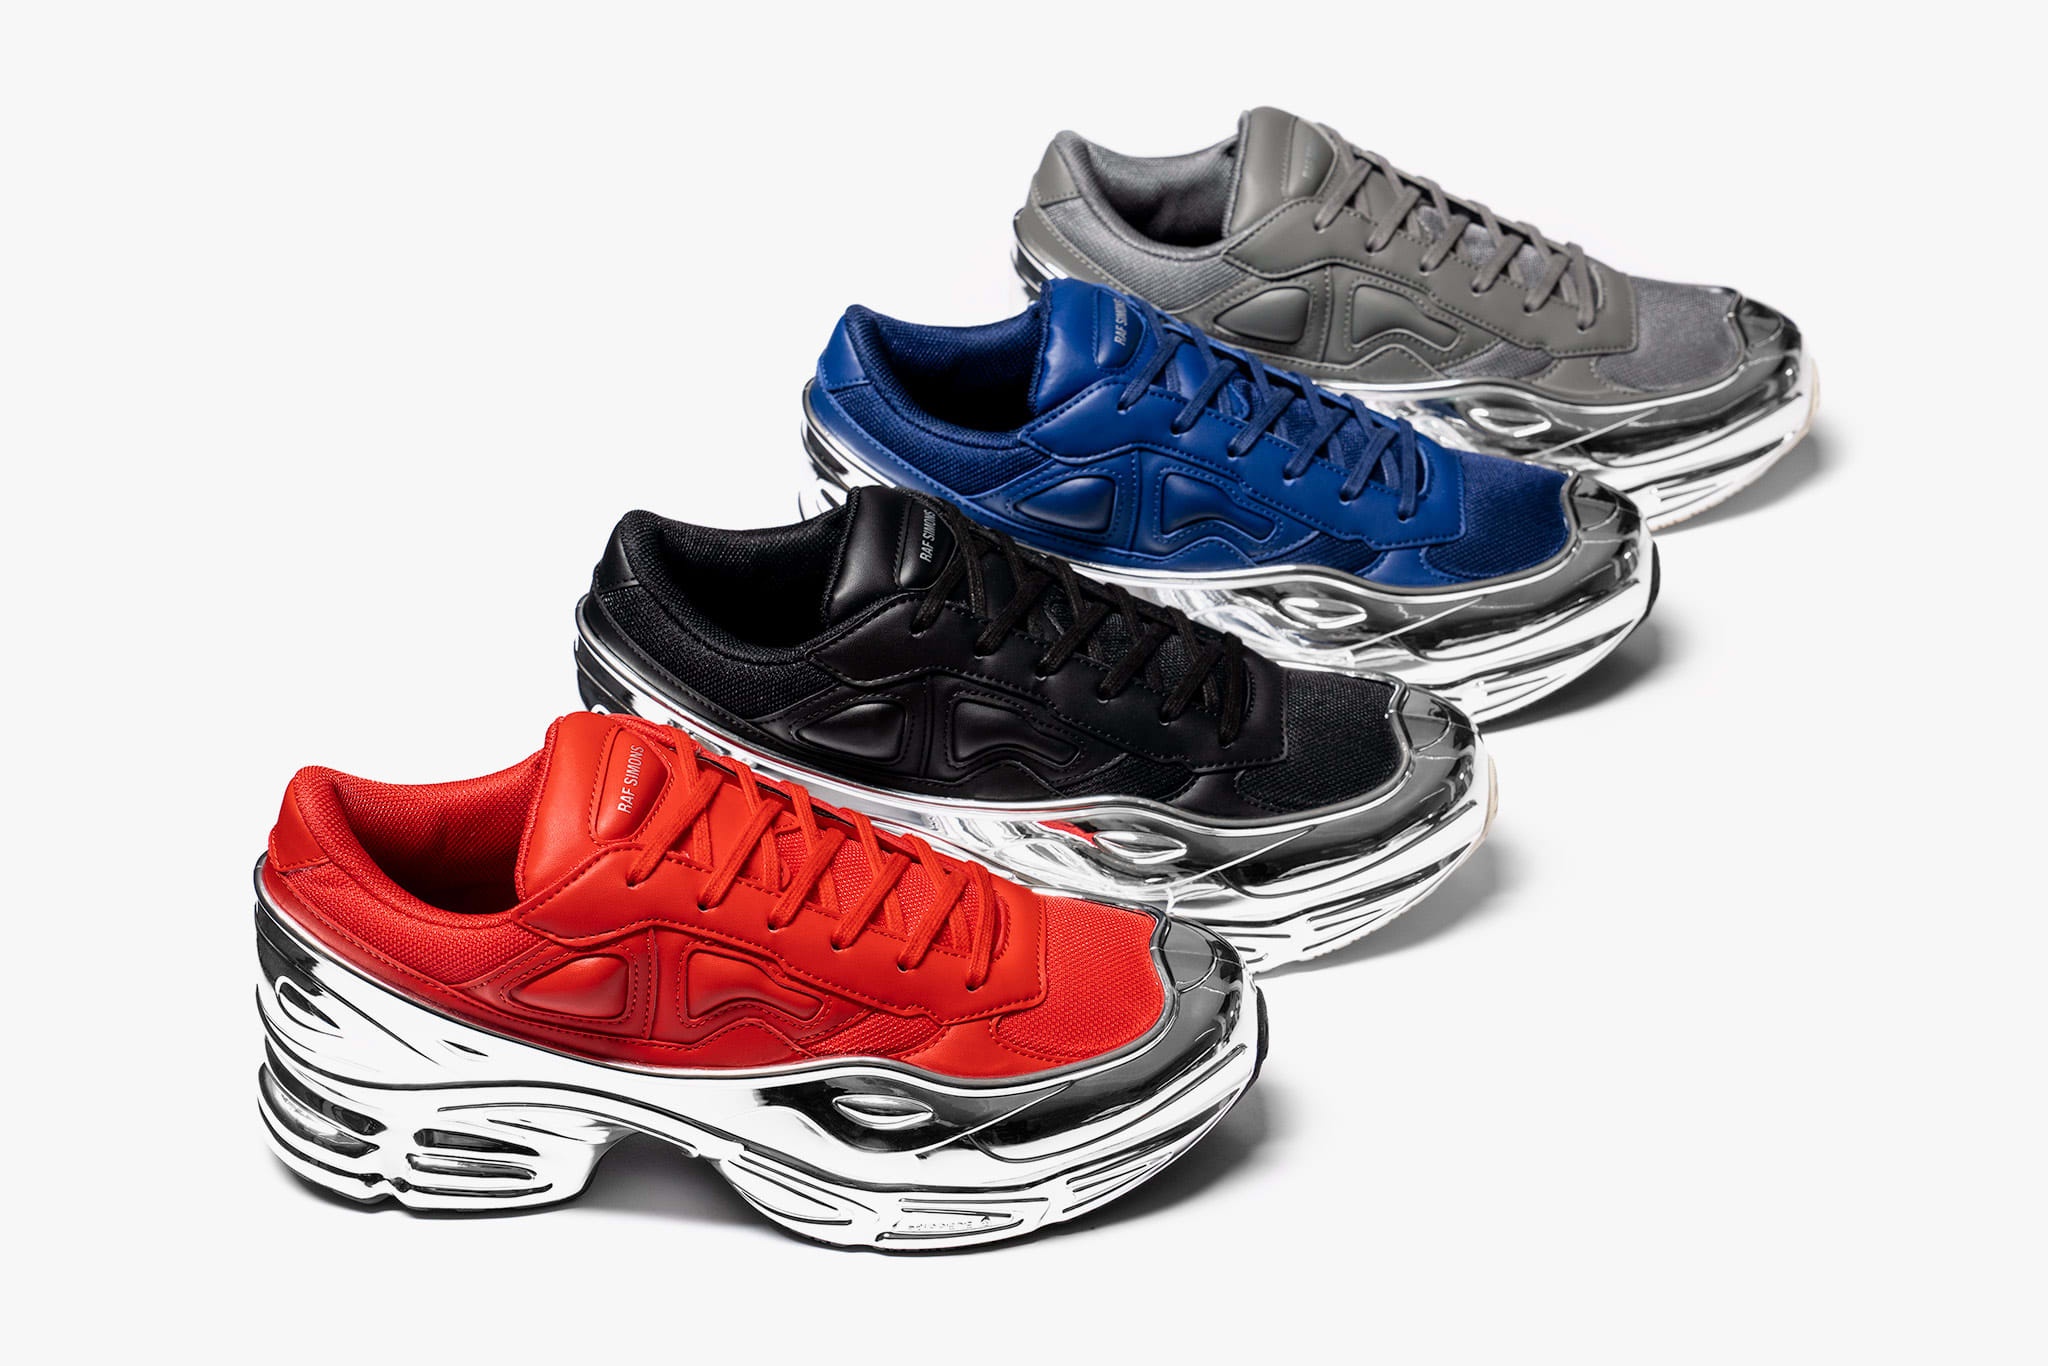 adidas x Raf Simons Ozweego Chrome Pack Release Date: 05.23.19 | HAVEN